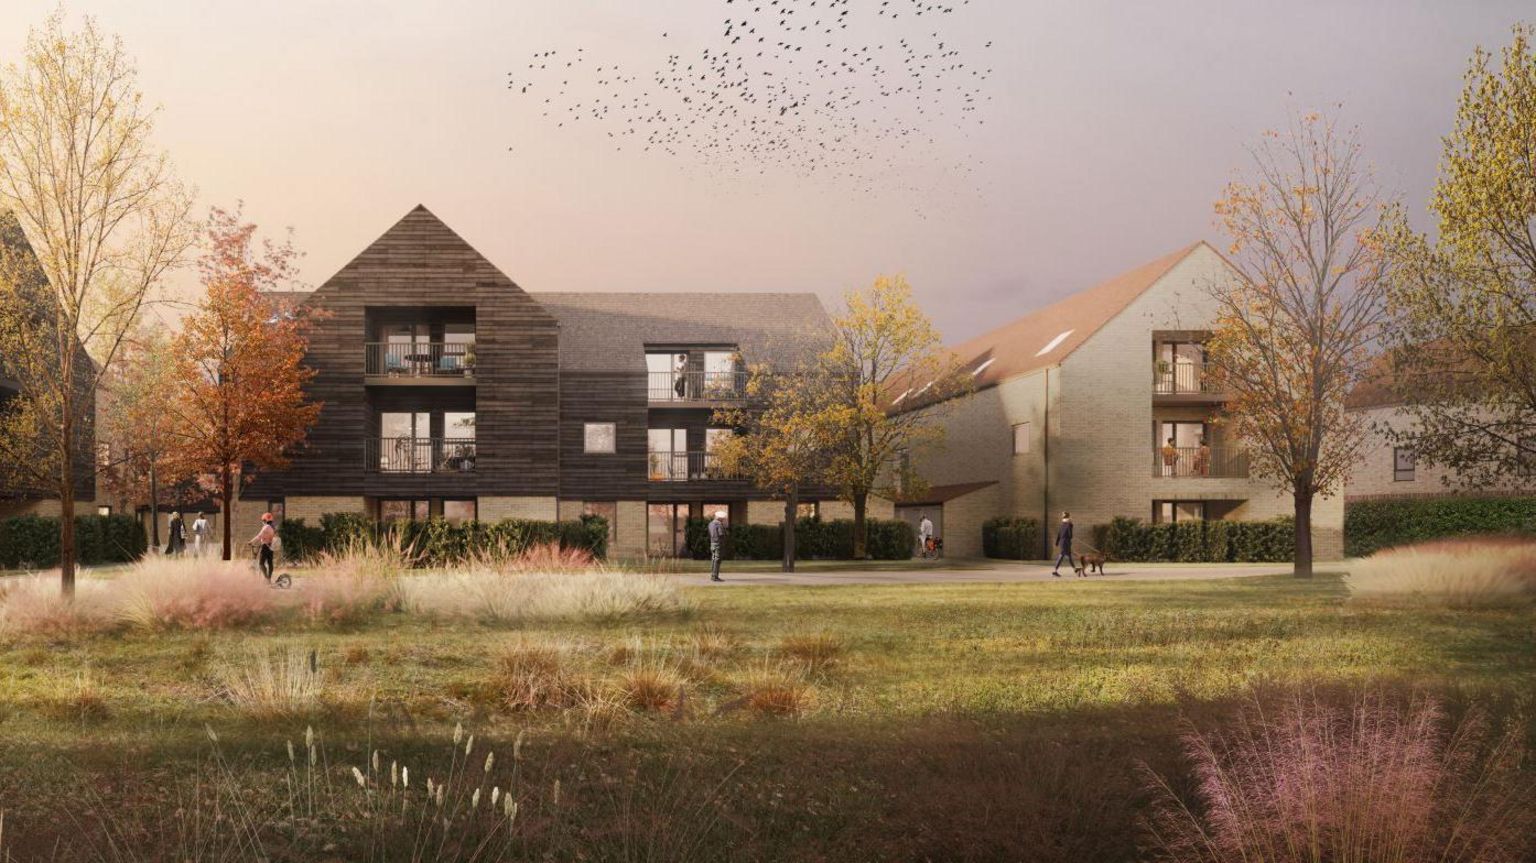 Illustrative image of the proposed at Netherhall Farm, off Wort’s Causeway, Cambridge